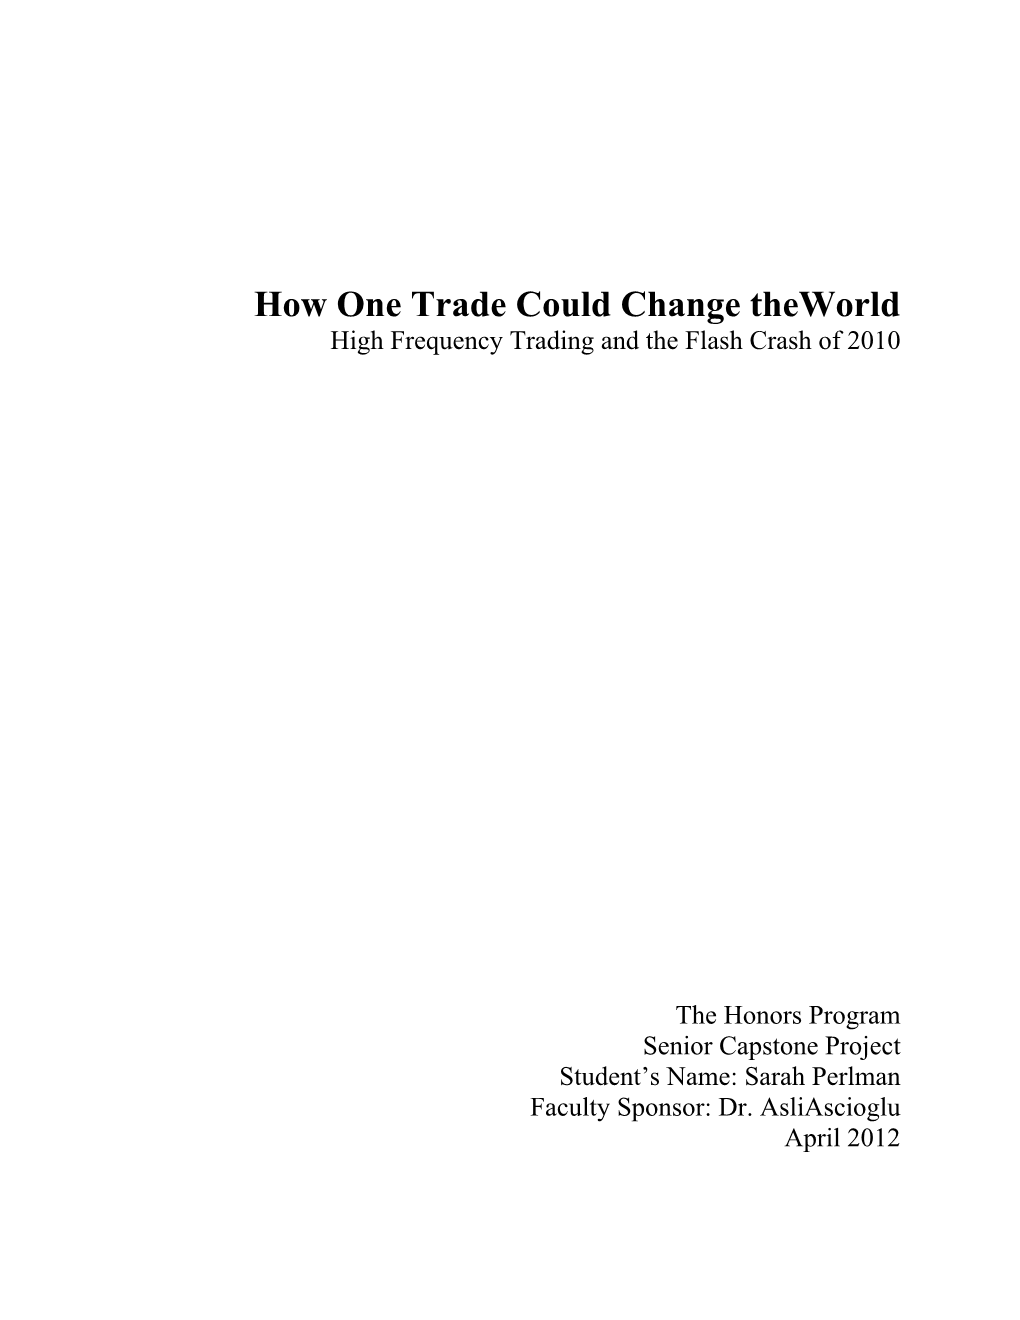 How One Trade Could Change the World: High Frequency Trading And